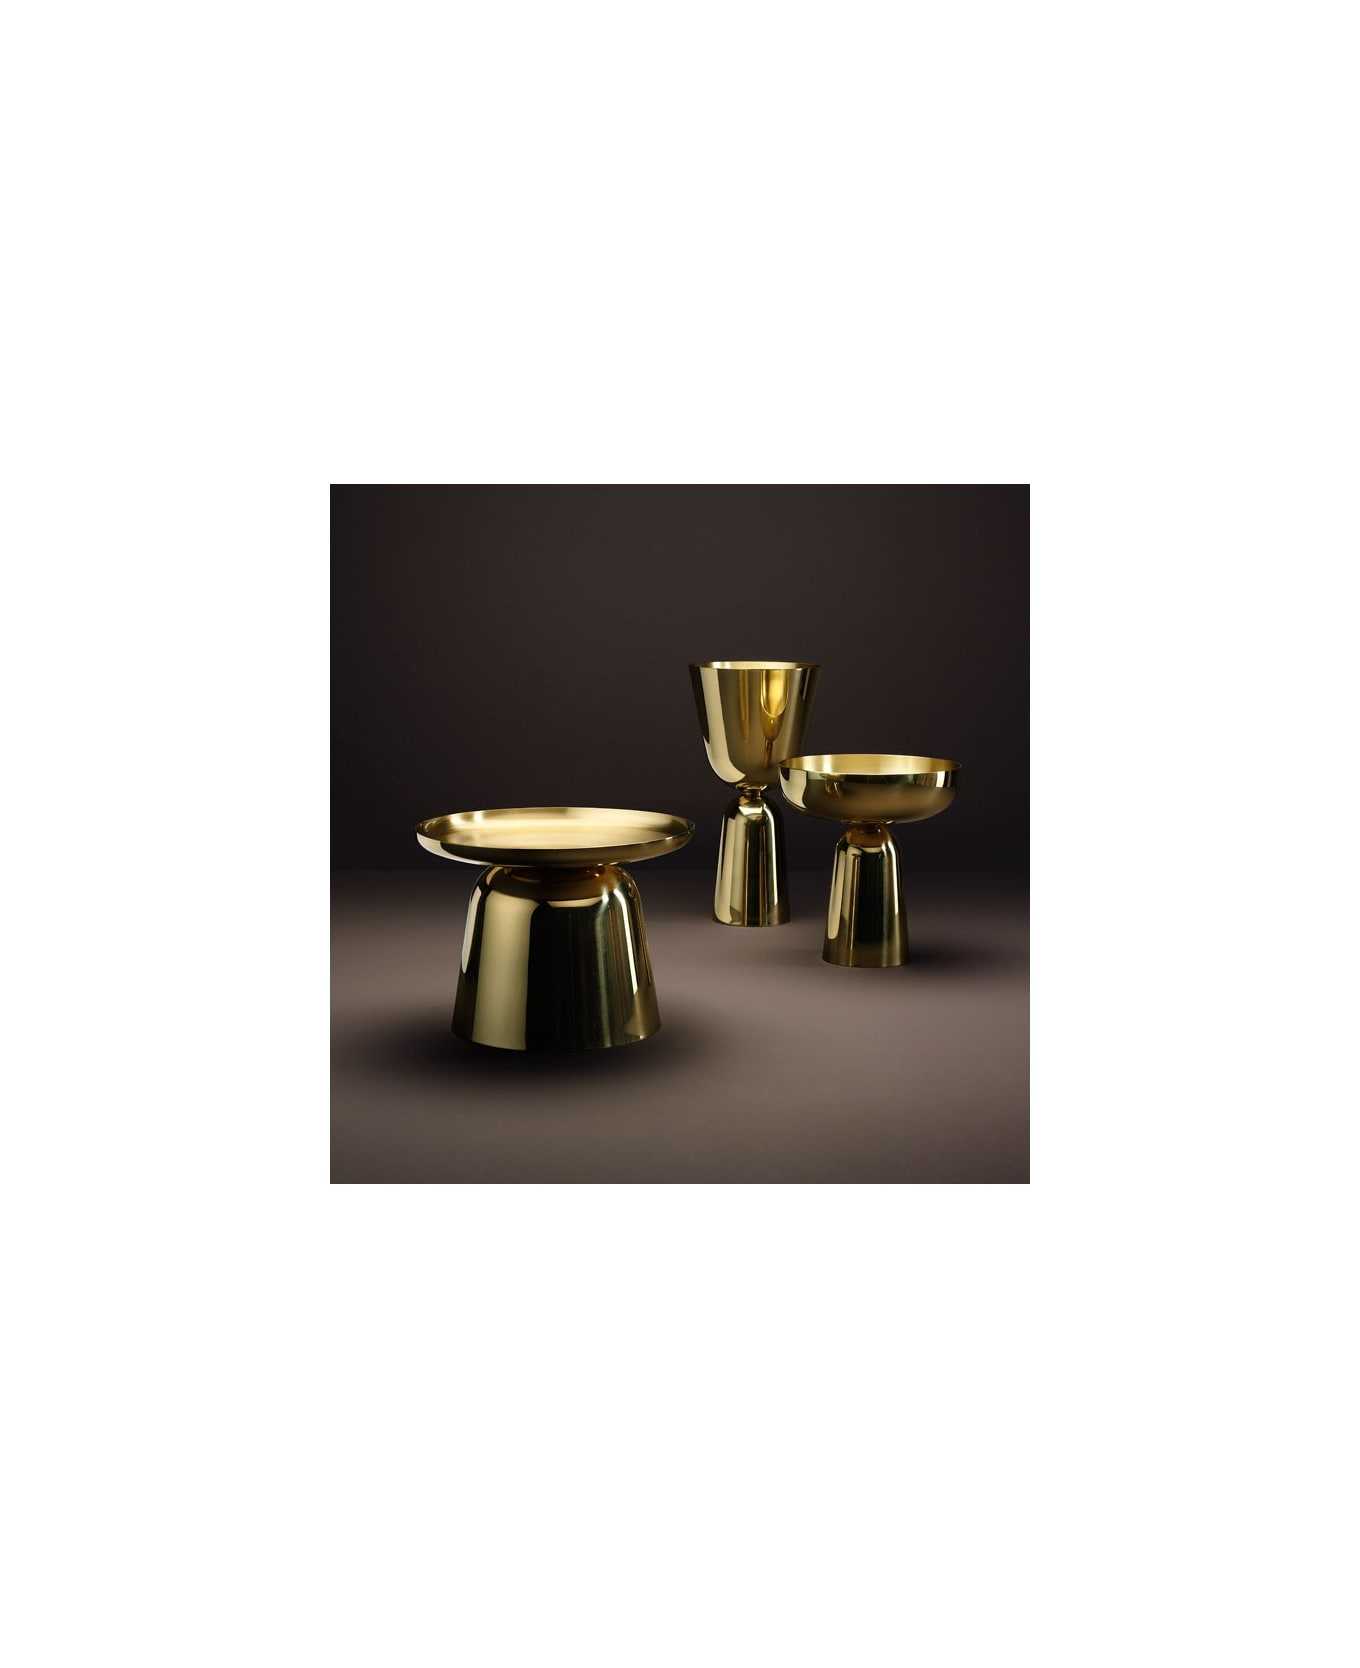 Ghidini 1961 Flirt Collection - Gil&luc Polished Brass - Polished brass